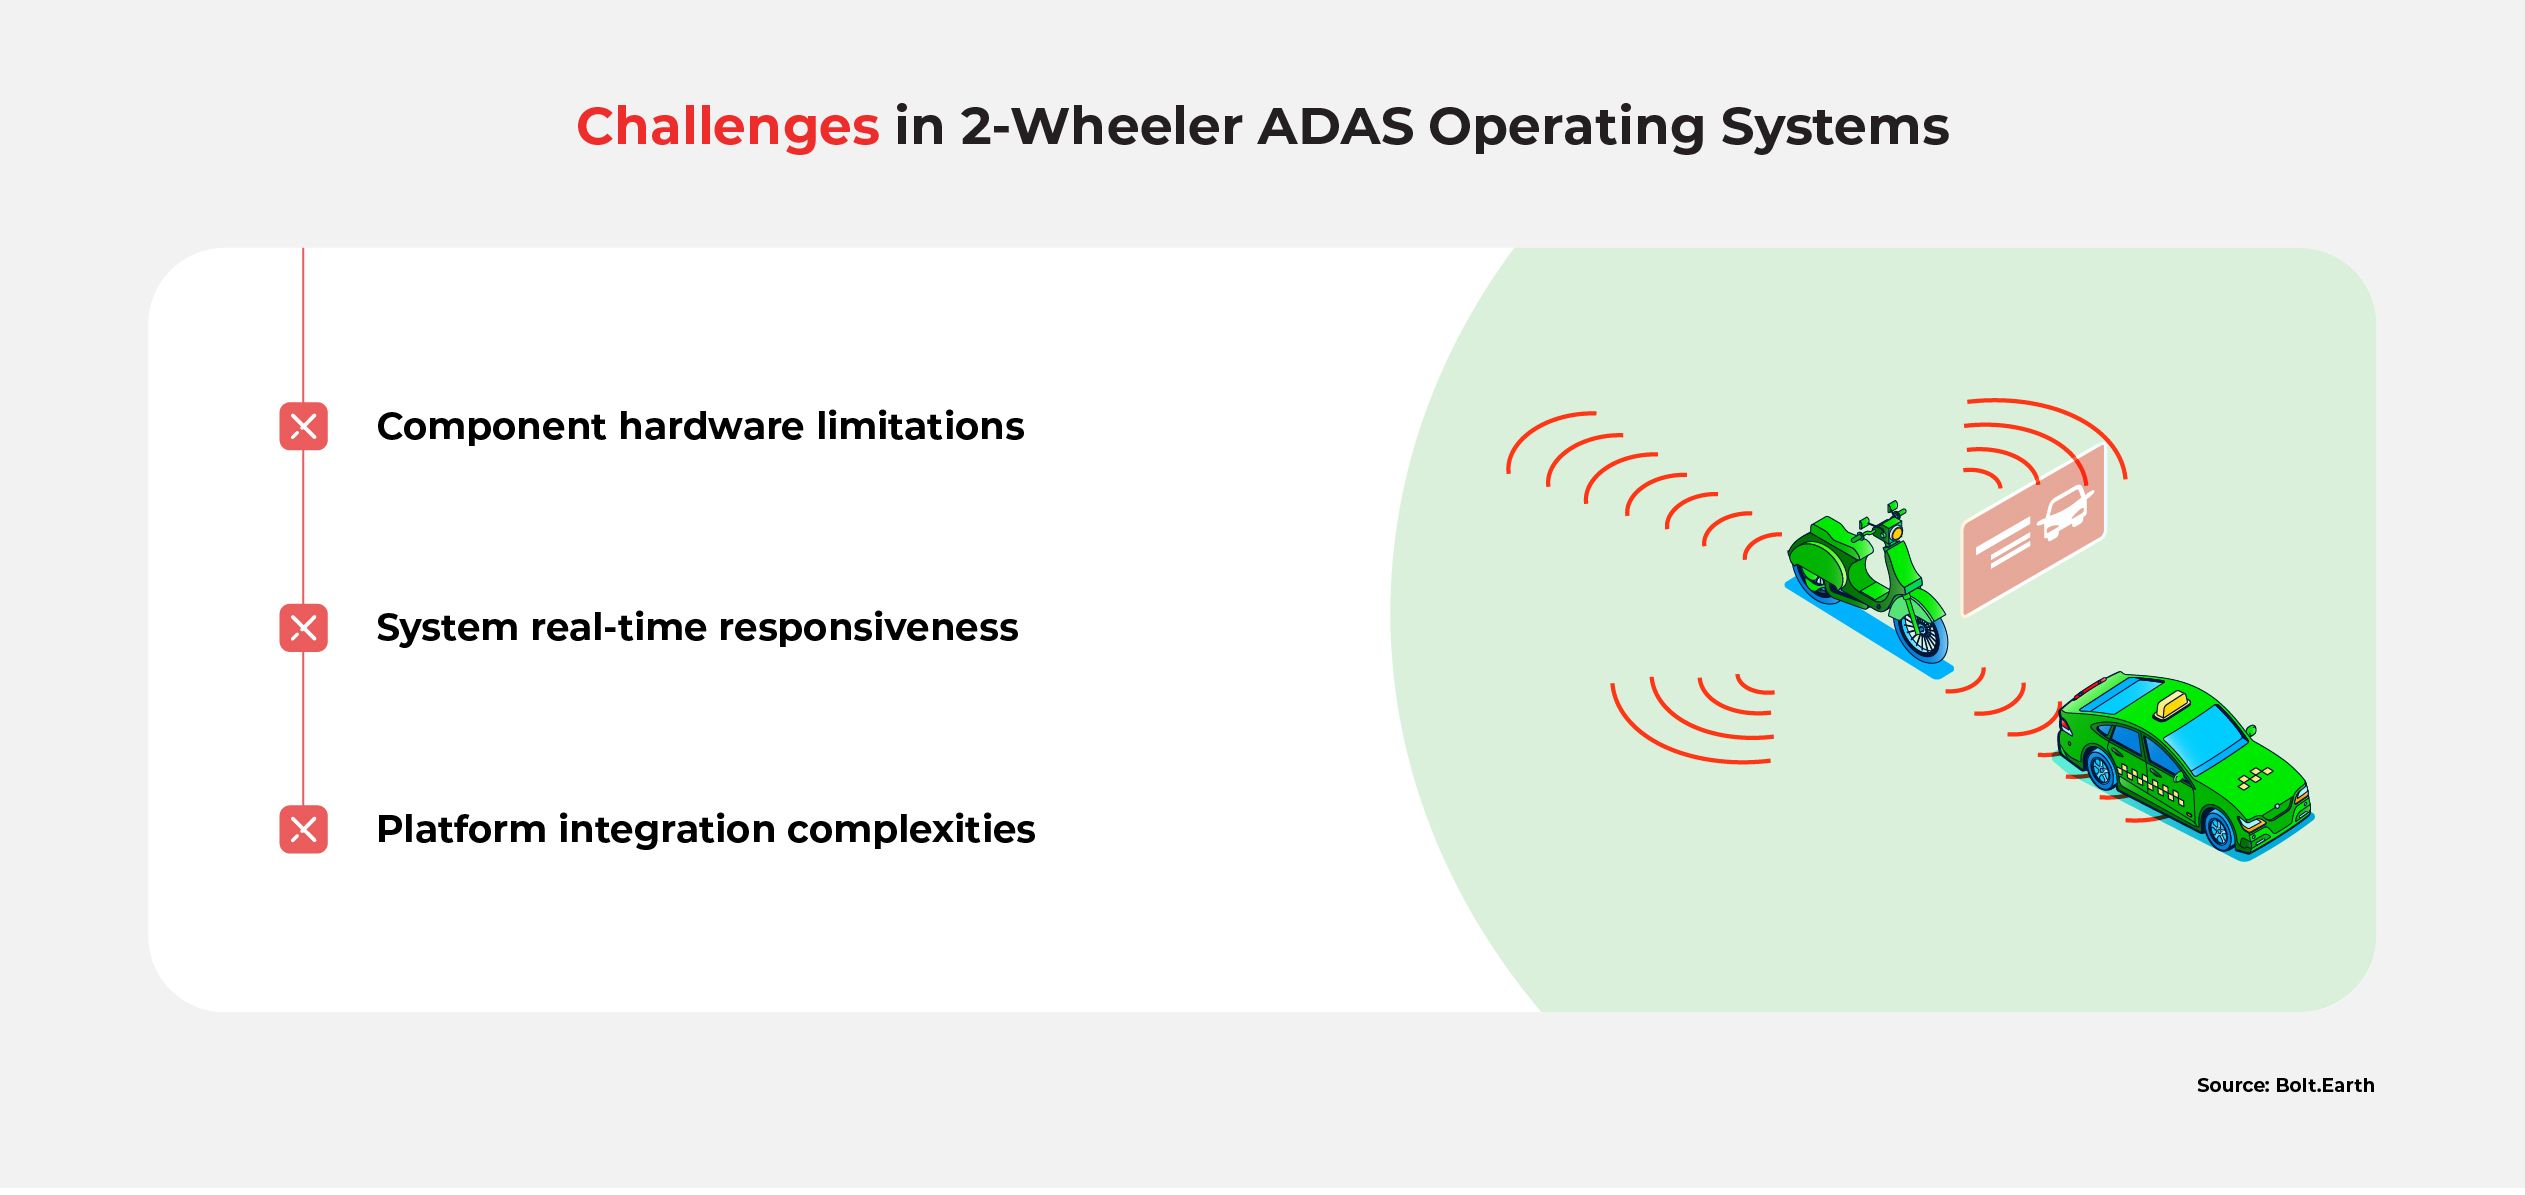 A list of challenges in 2W ADAS OS